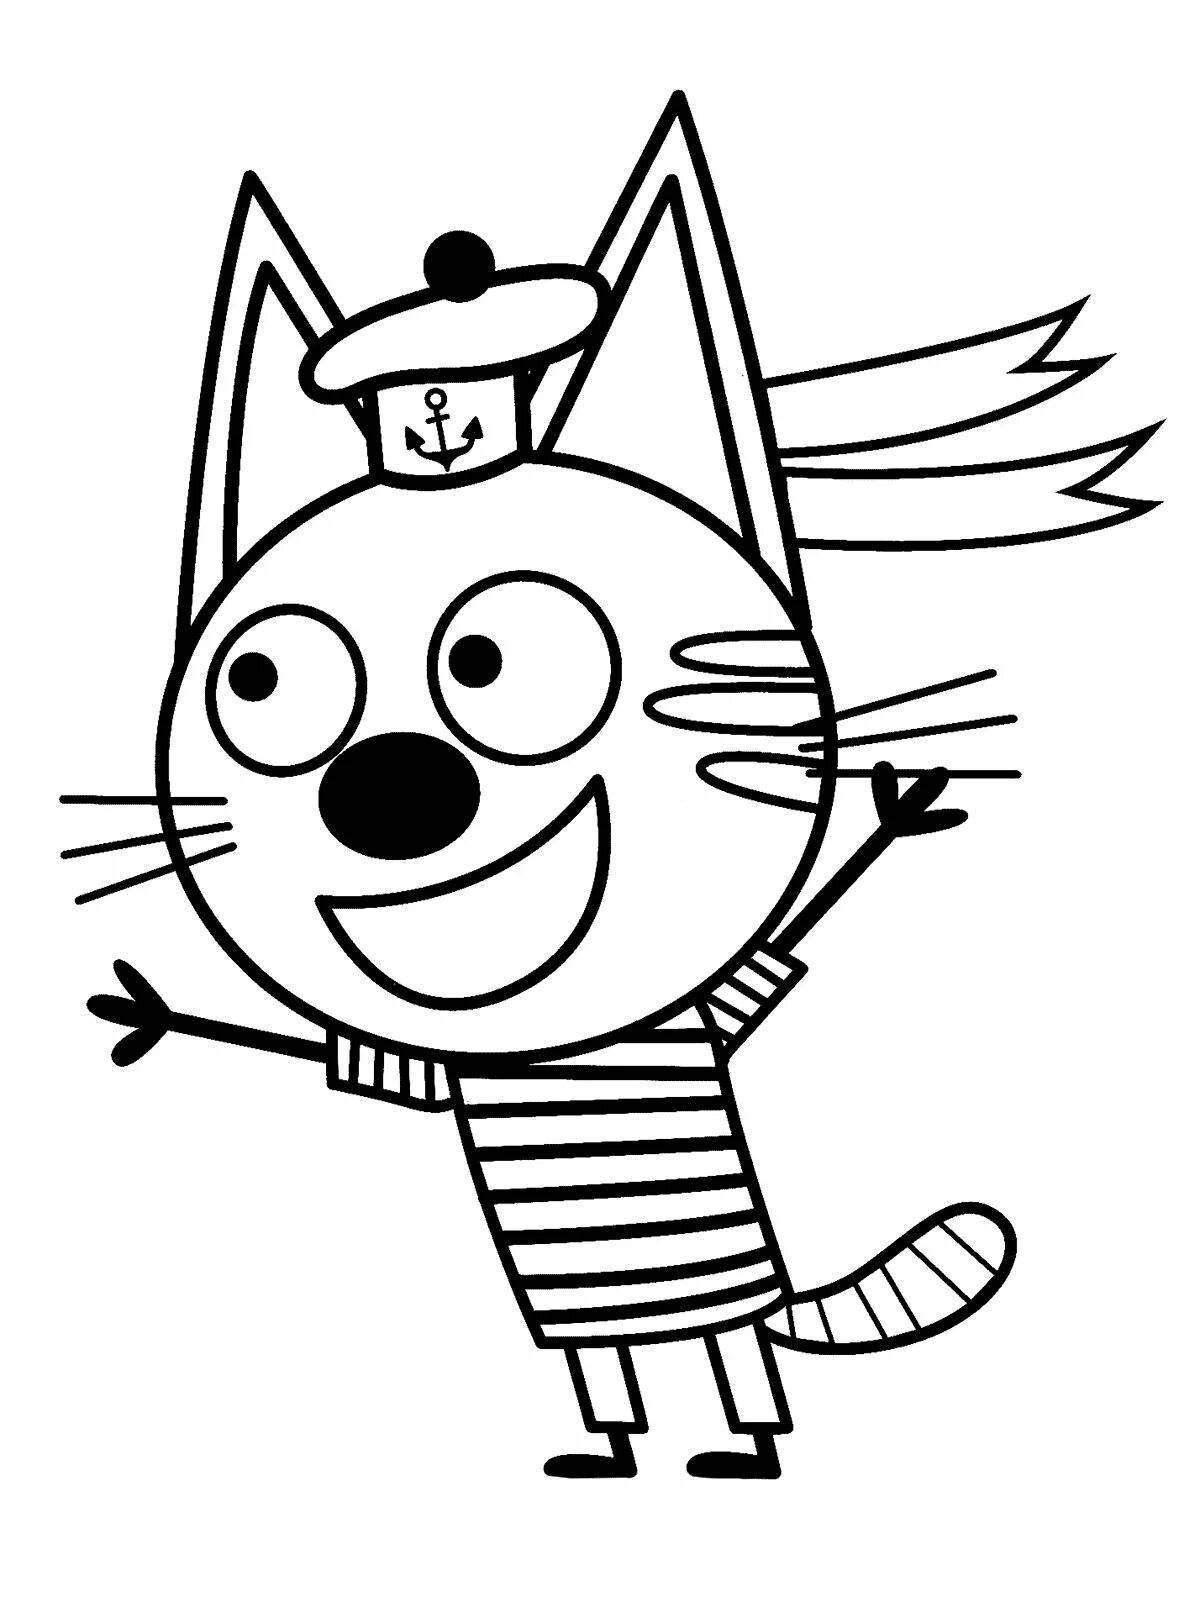 Children's three cats coloring book for kids